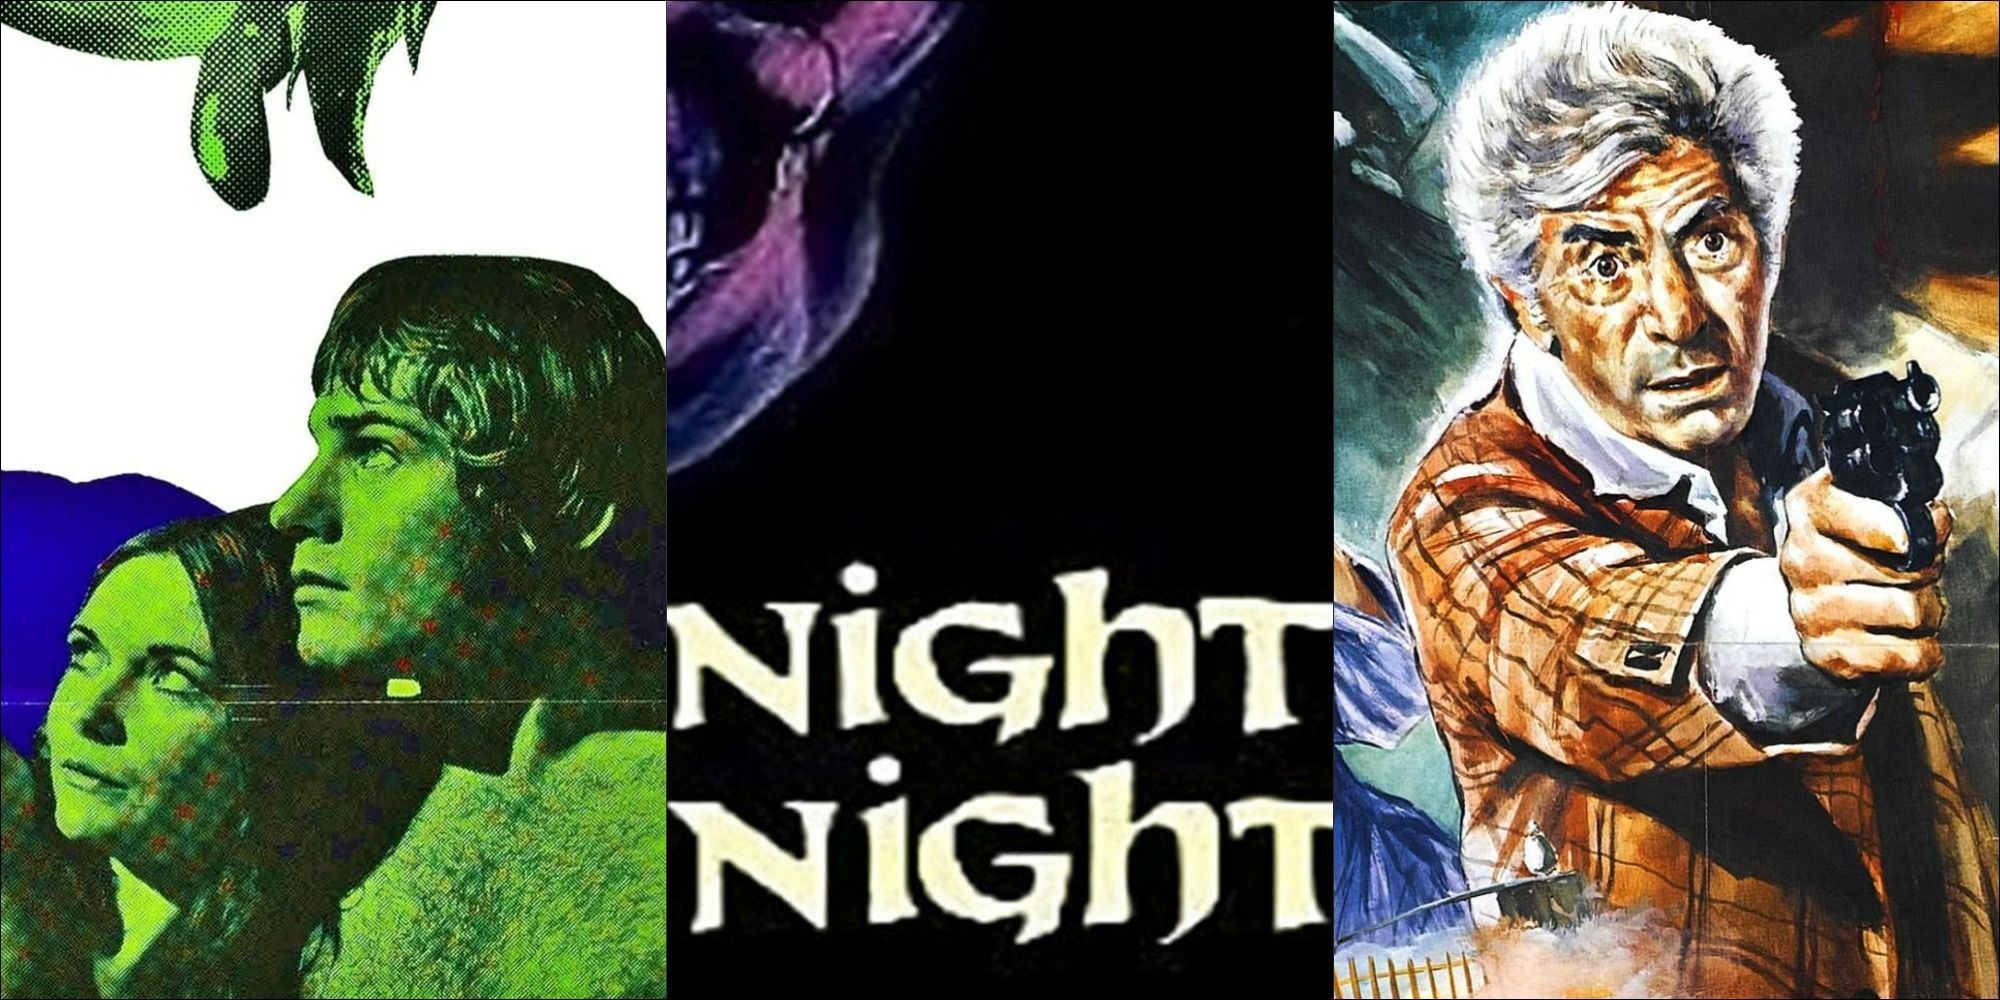 Theatrical posters for three slasher films older than Halloween